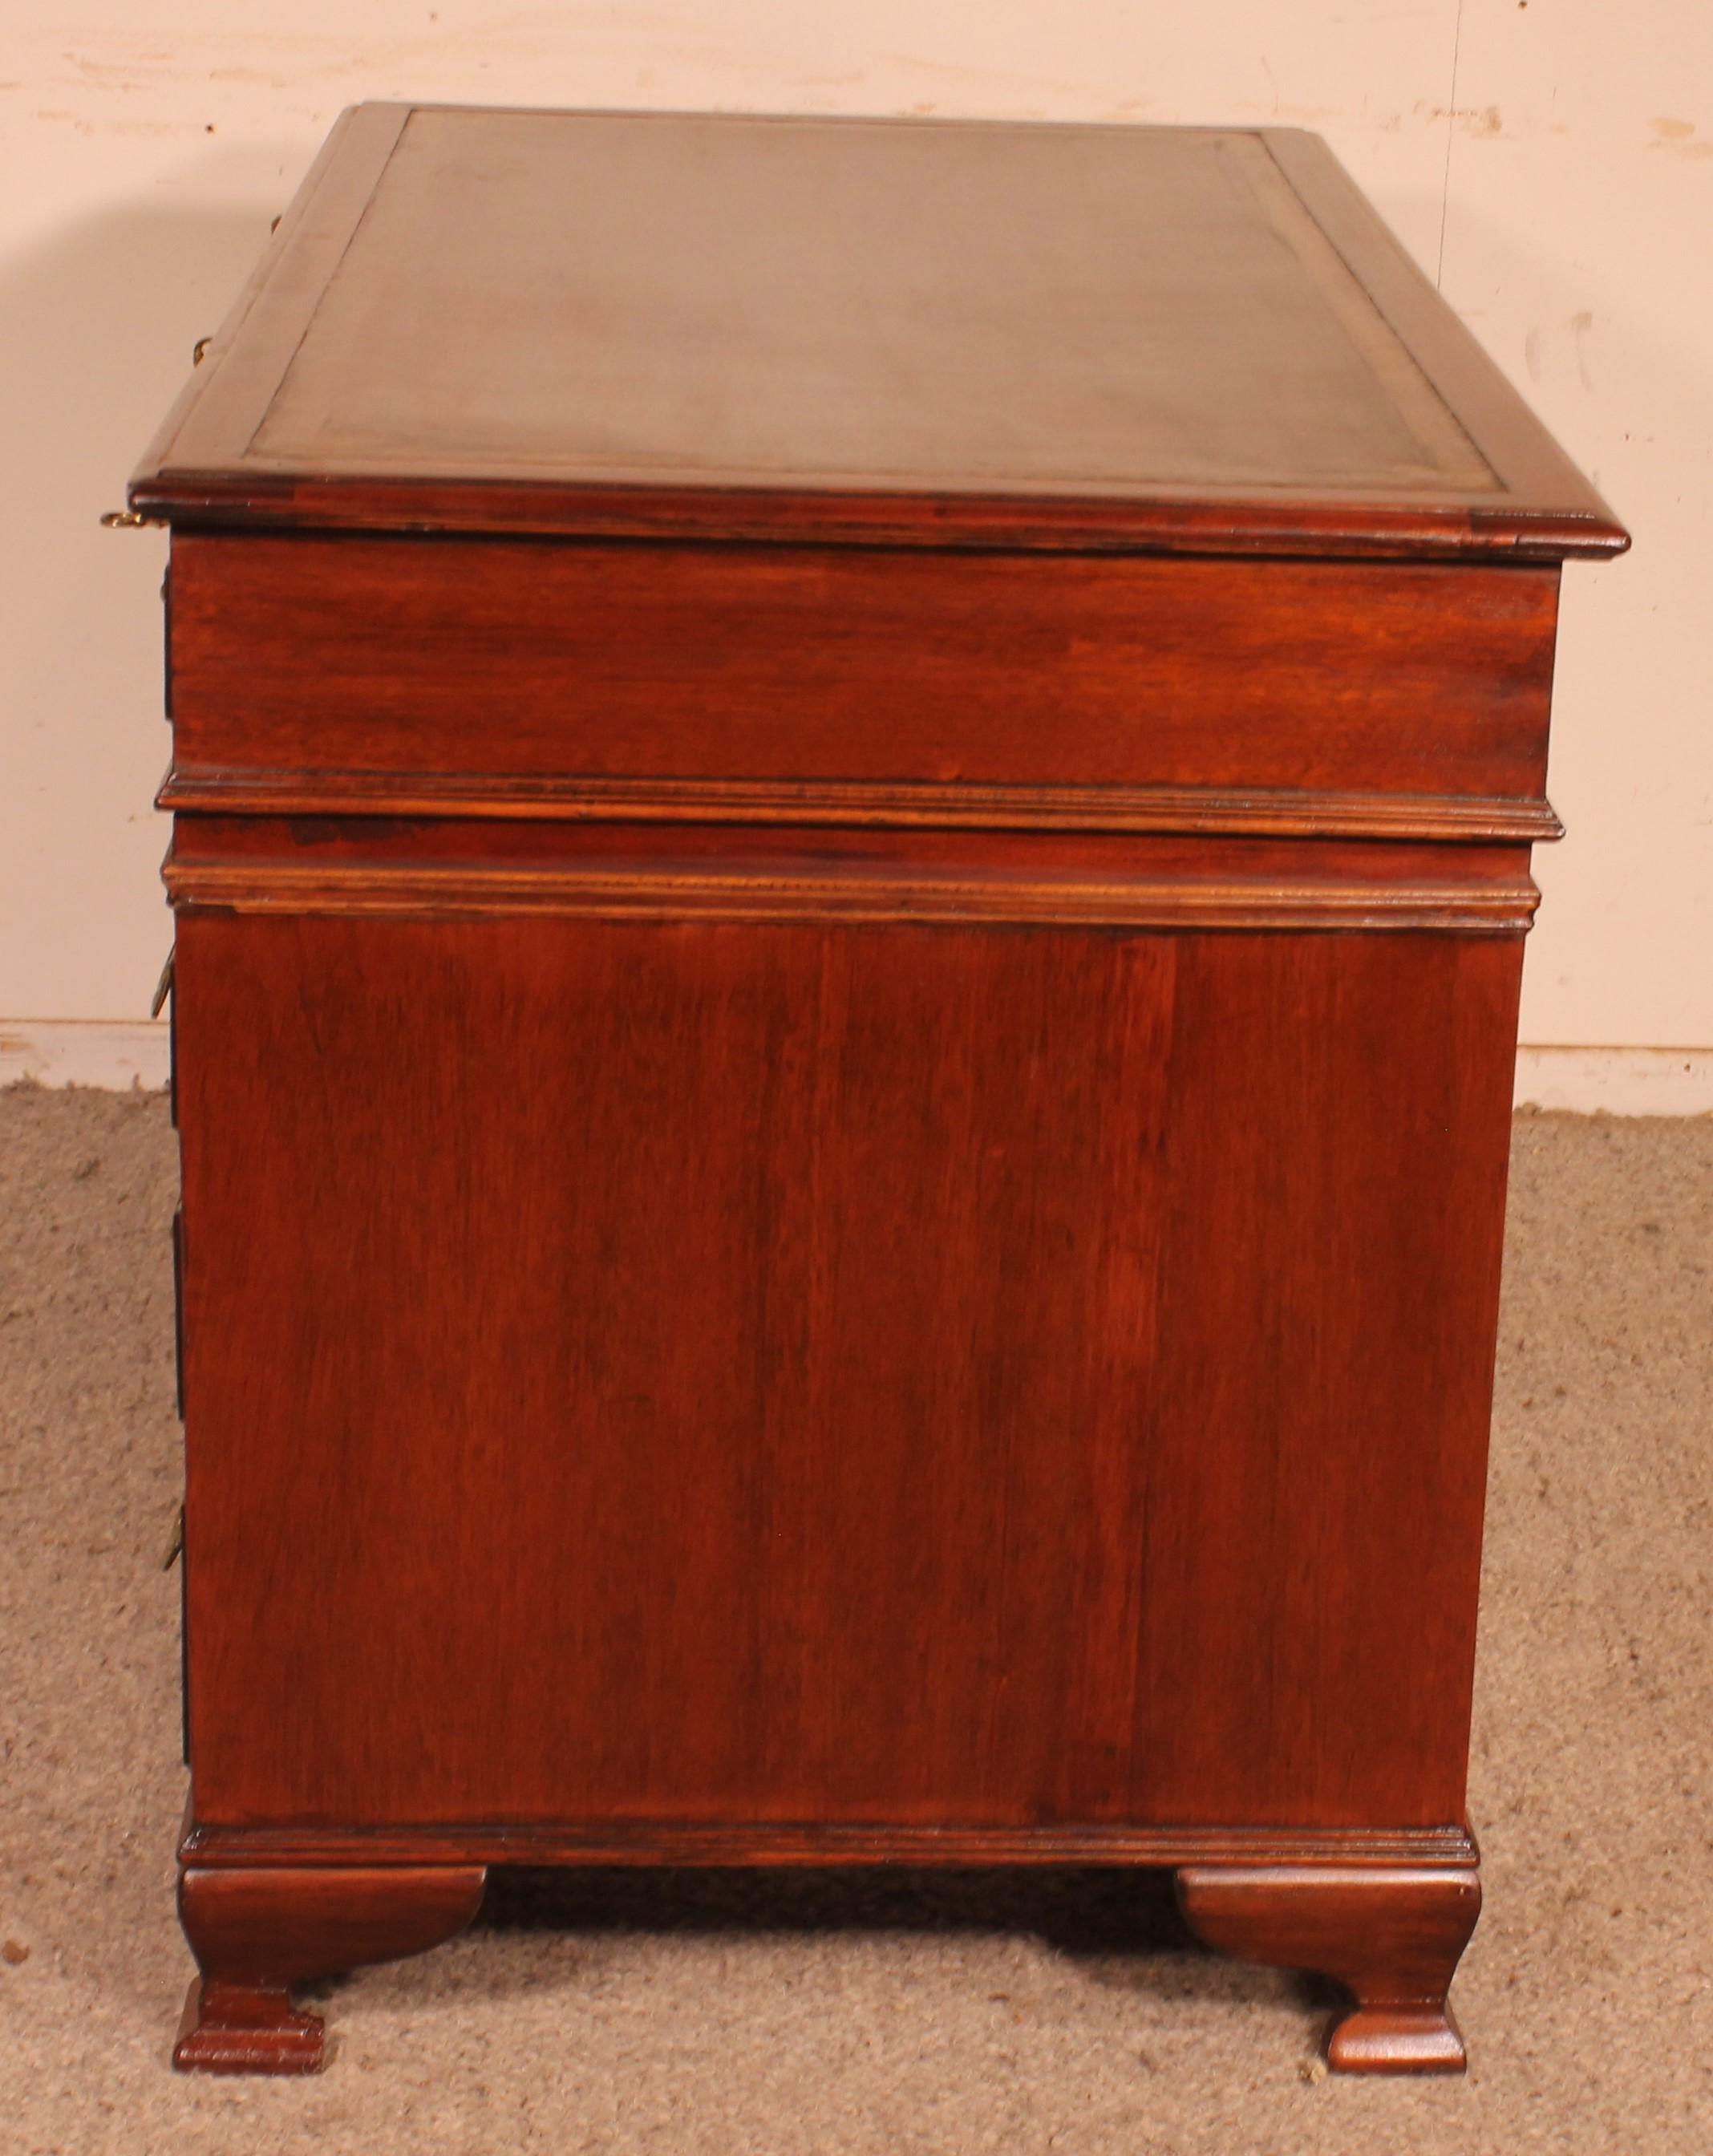 Small Mahogany Pedestal Desk From The 19 ° Century In Good Condition For Sale In Brussels, Brussels